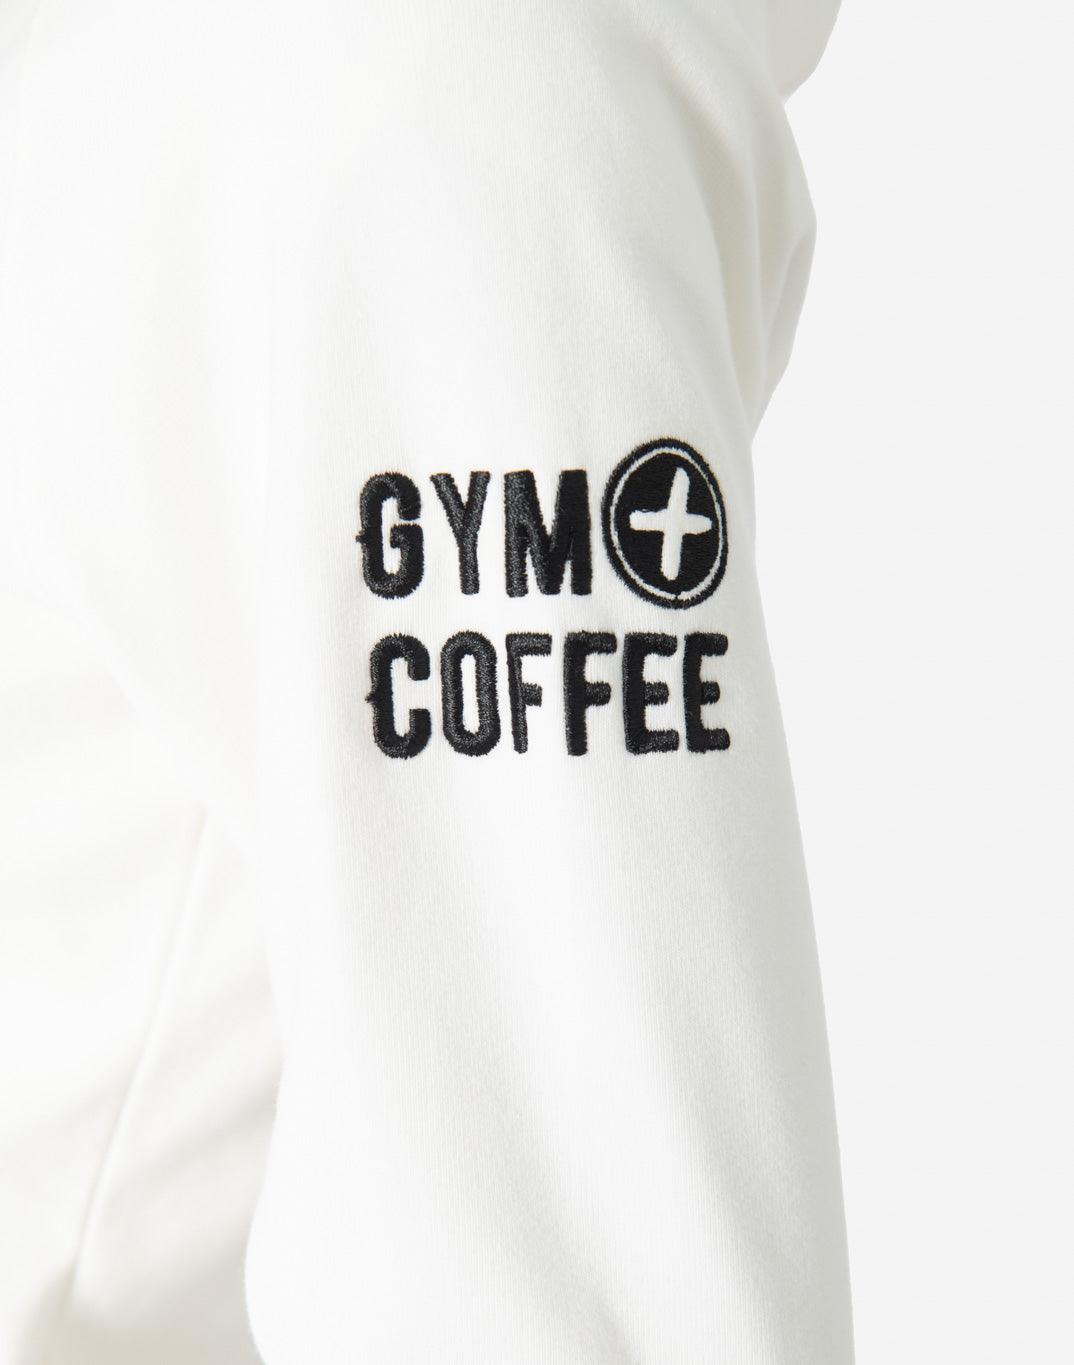 NWT The Gym People White Soft Sweatshirt with Hood - $19 (62% Off Retail)  New With Tags - From peachy